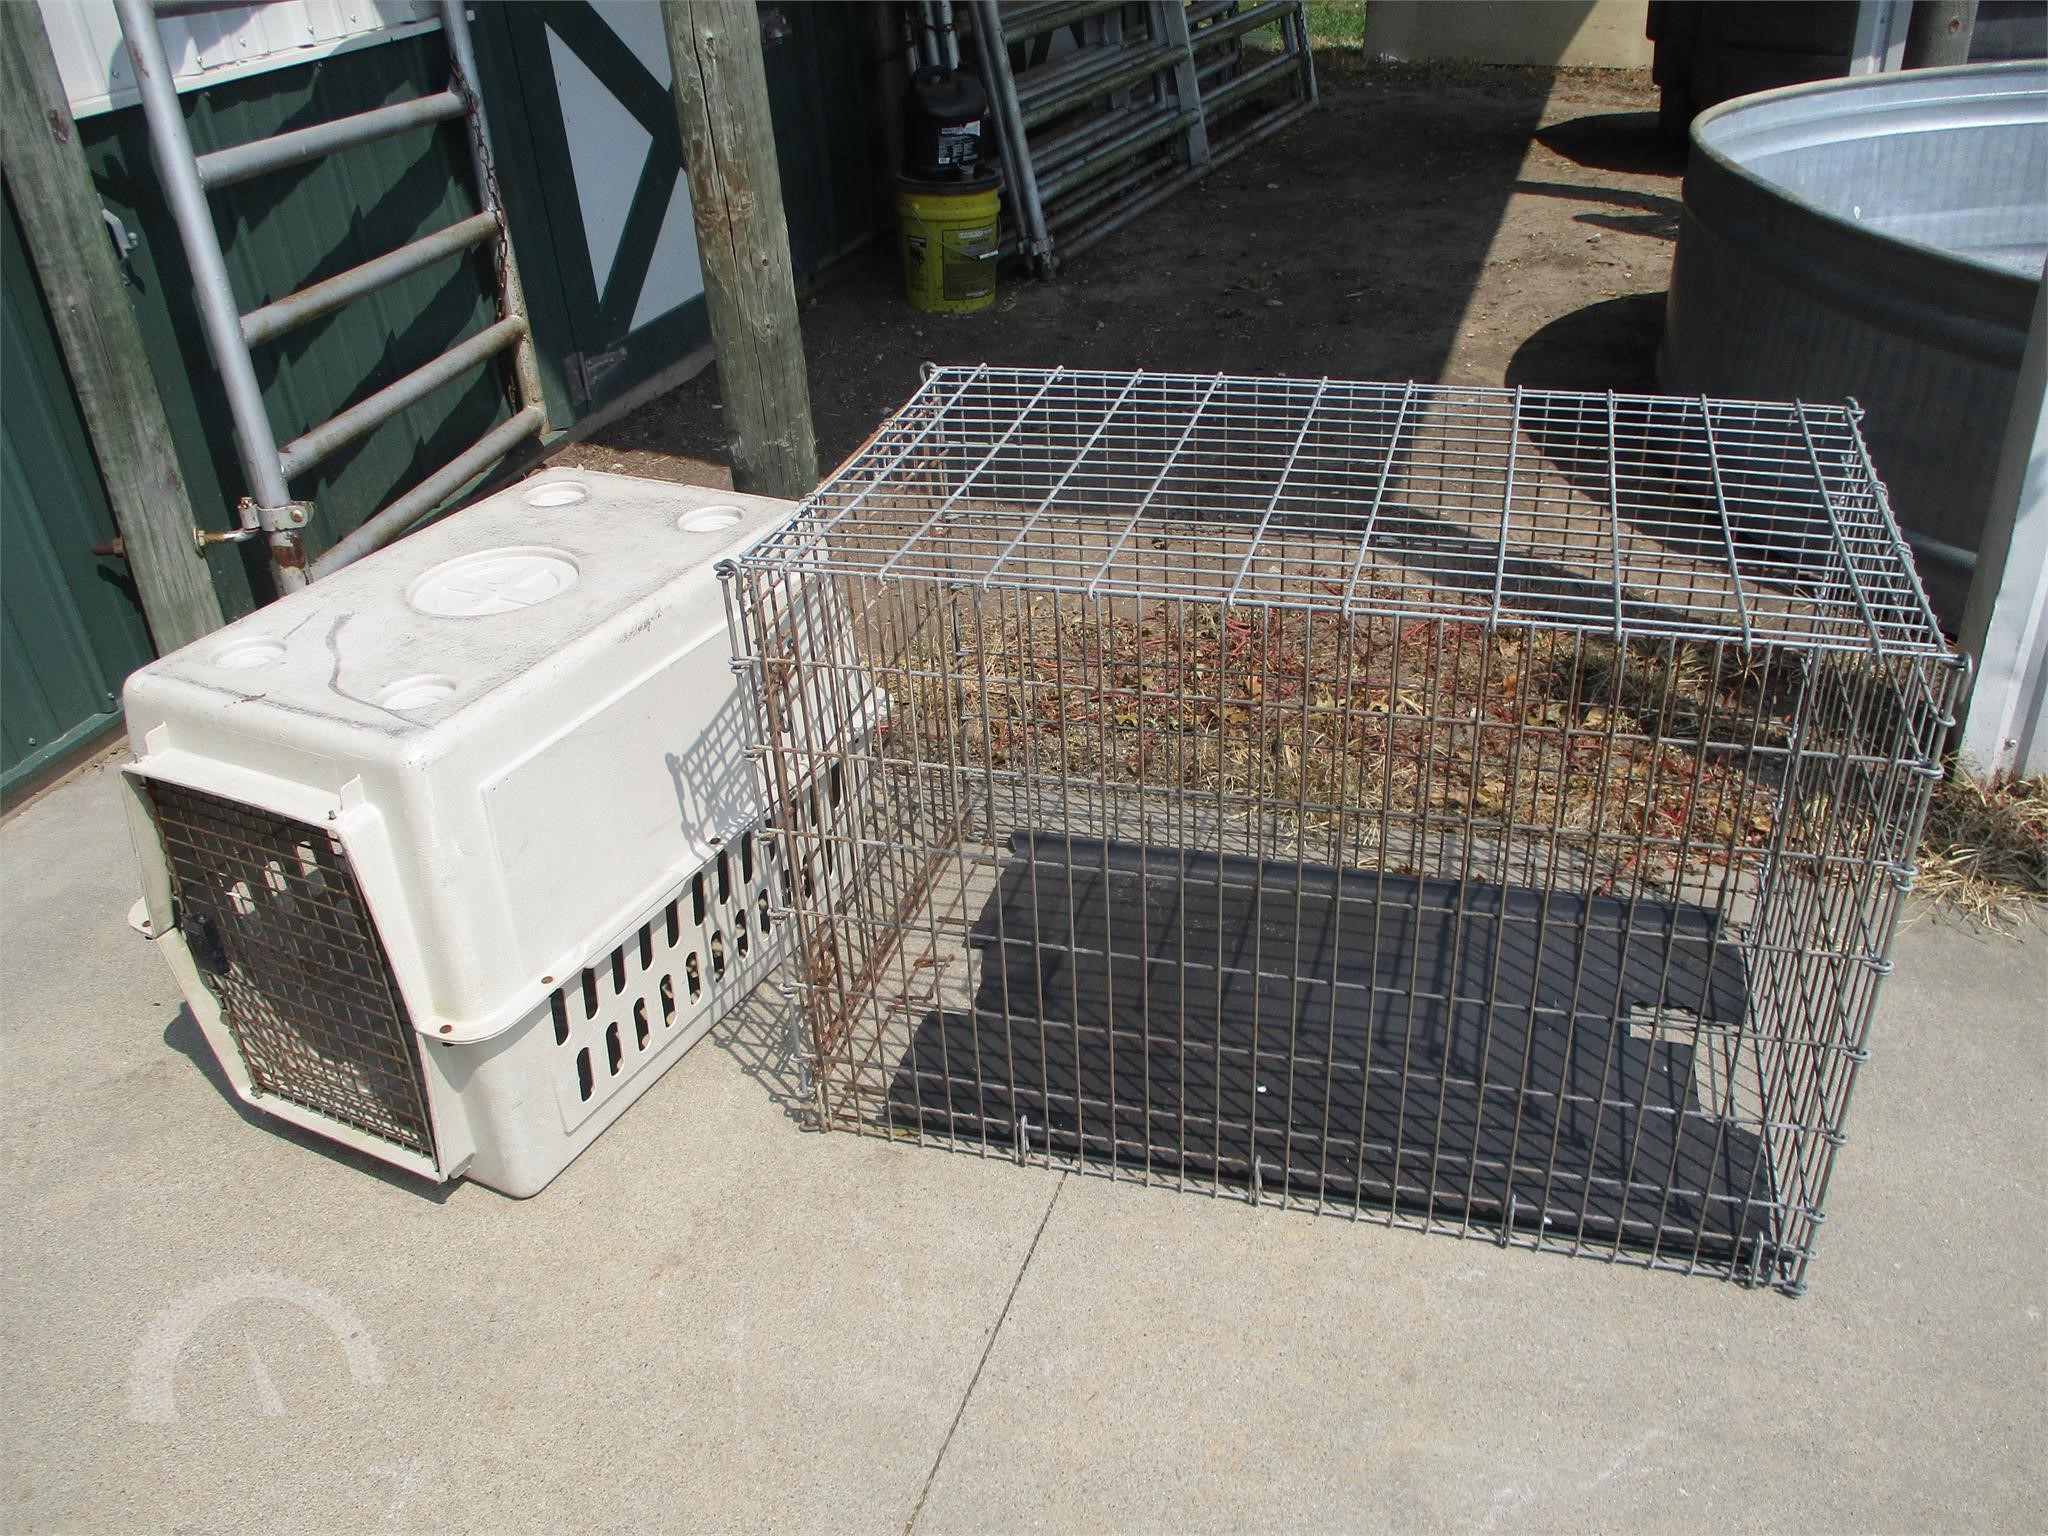 Details about   Live Animal Trap Extra Large Rodent Cage Garden Rabbit Raccoon Cat 24"X8"X 